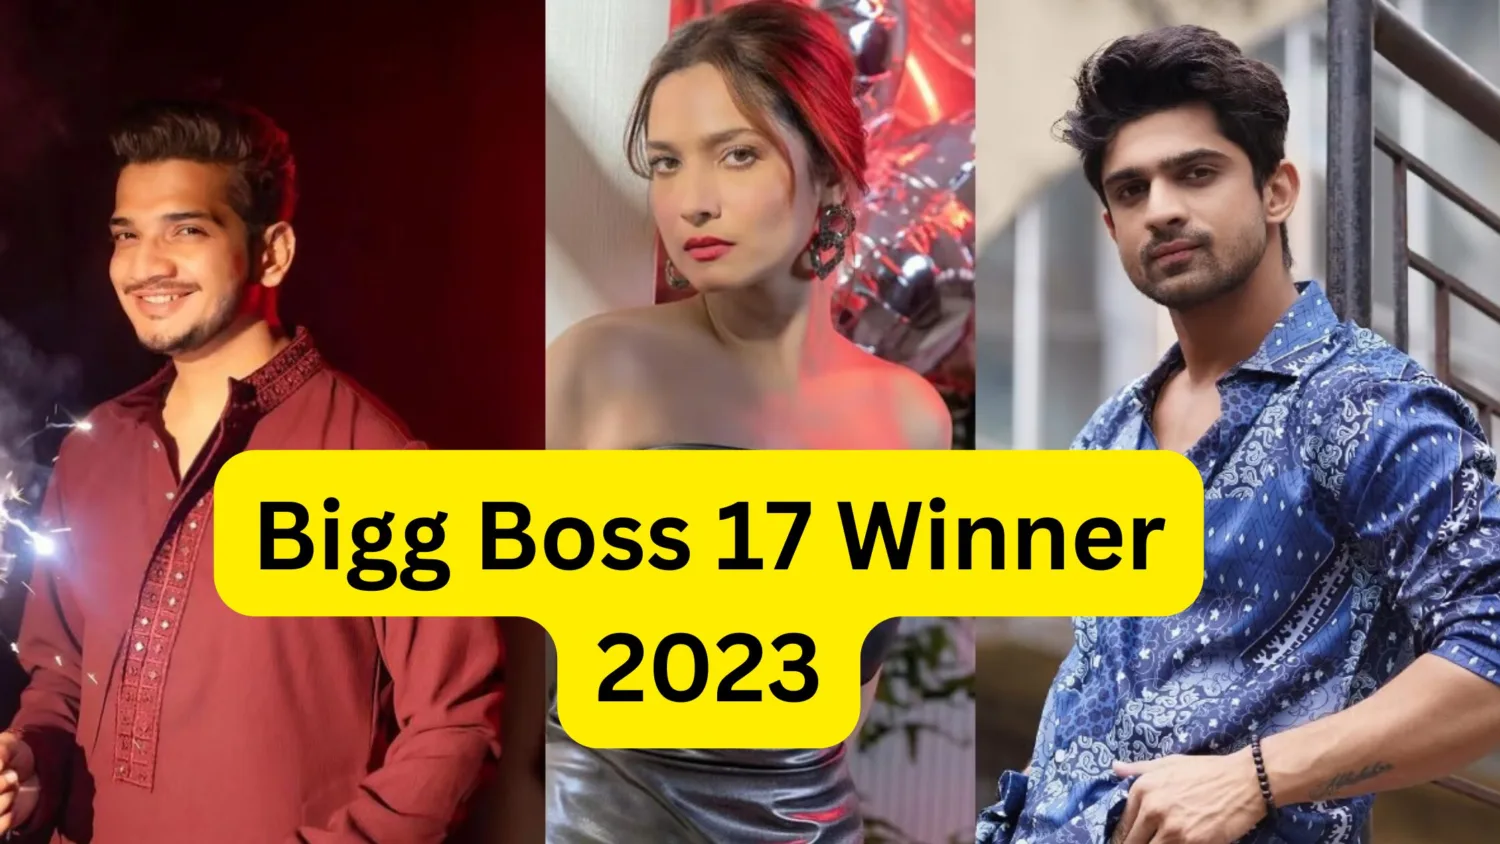 Bigg Boss 17 Winner finally announced and you will be shocked to know